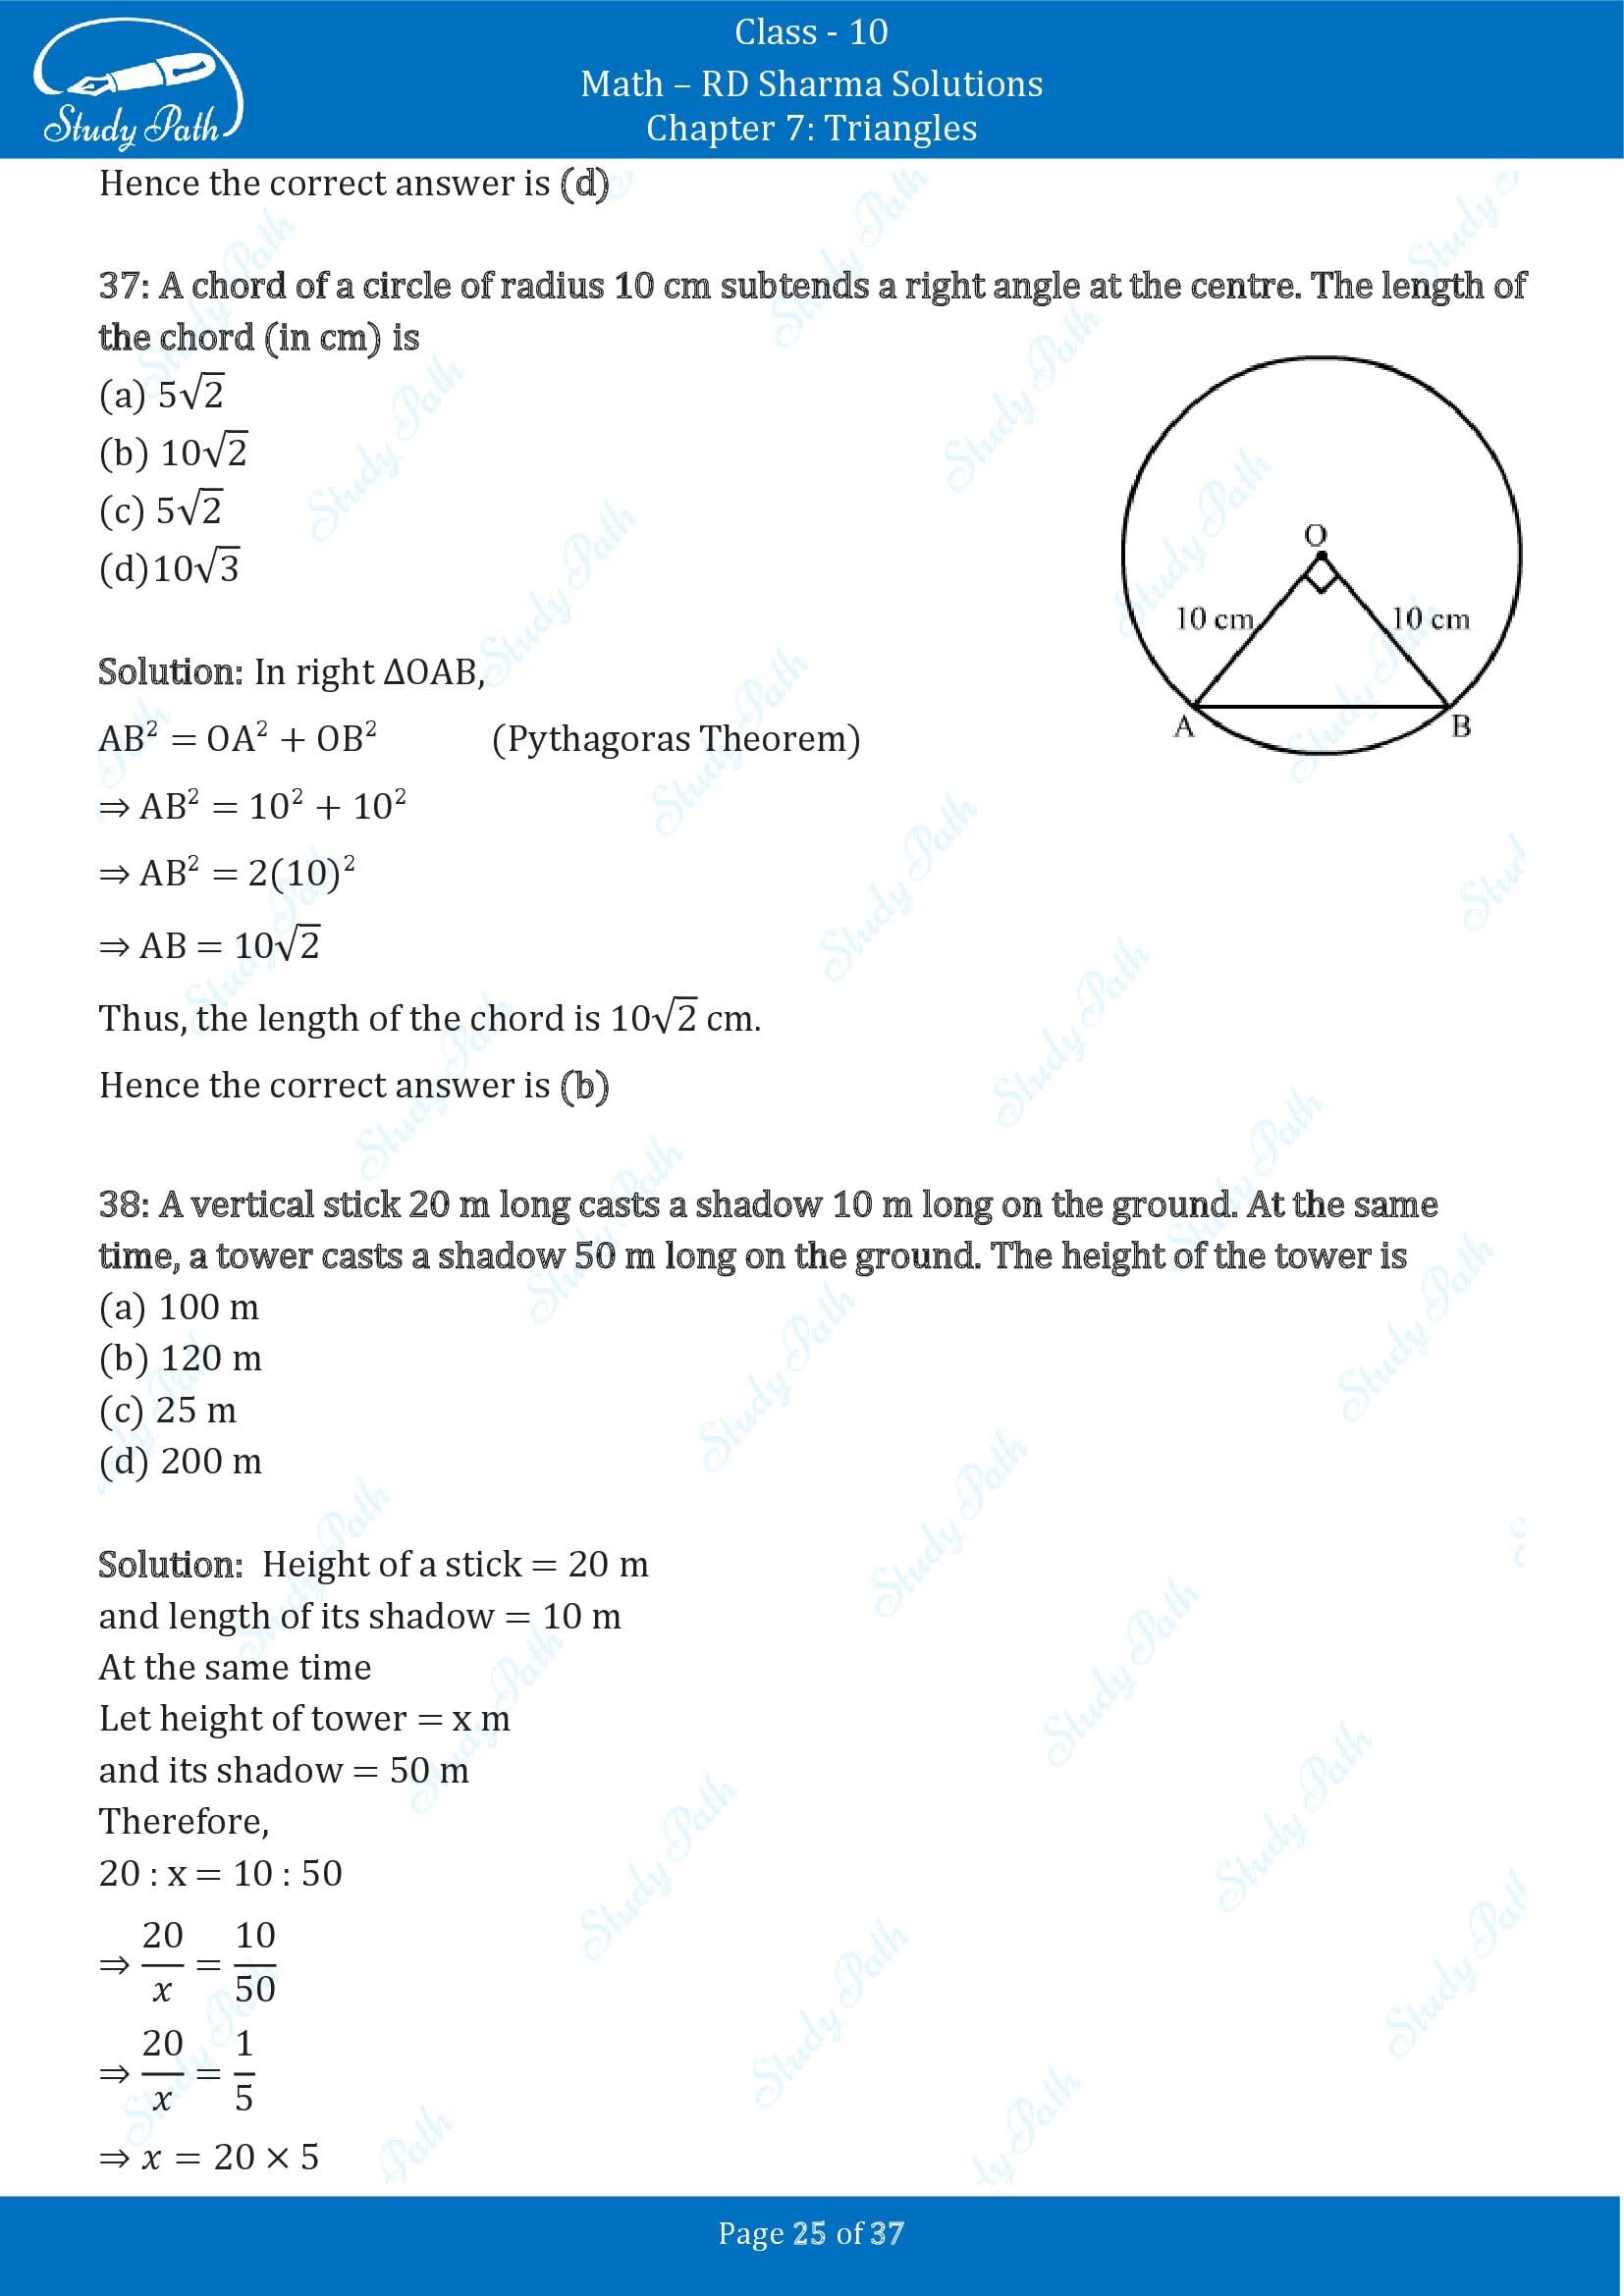 RD Sharma Solutions Class 10 Chapter 7 Triangles Multiple Choice Question MCQs 00025